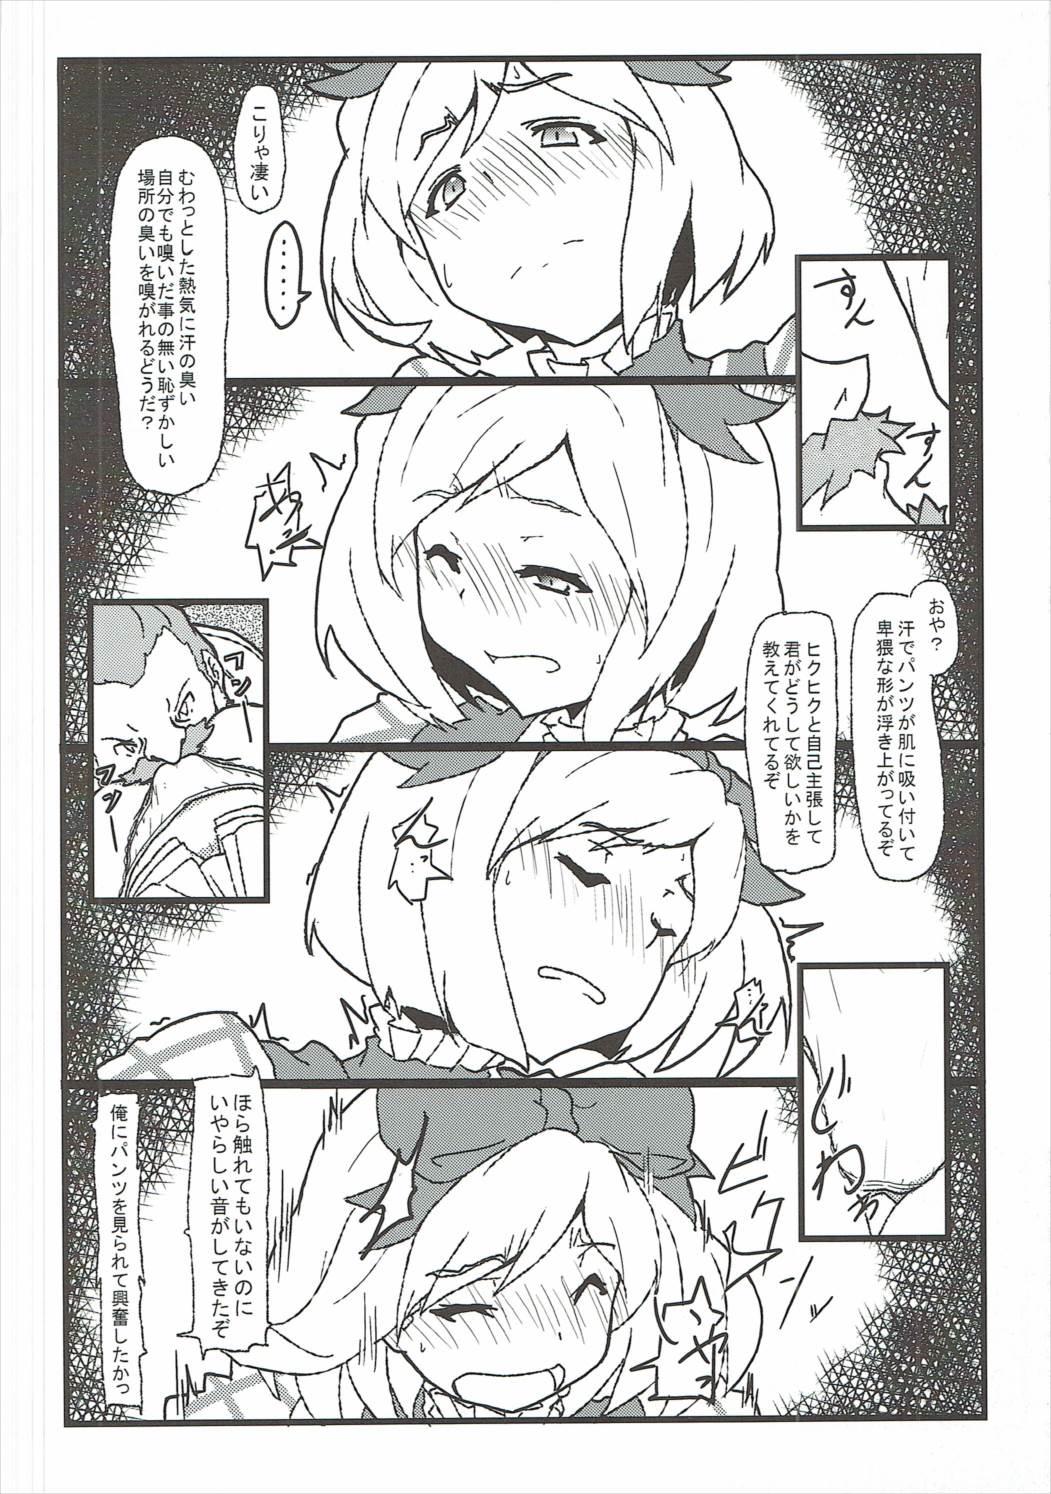 Russian Surprise Ticket - Granblue fantasy Squirt - Page 9